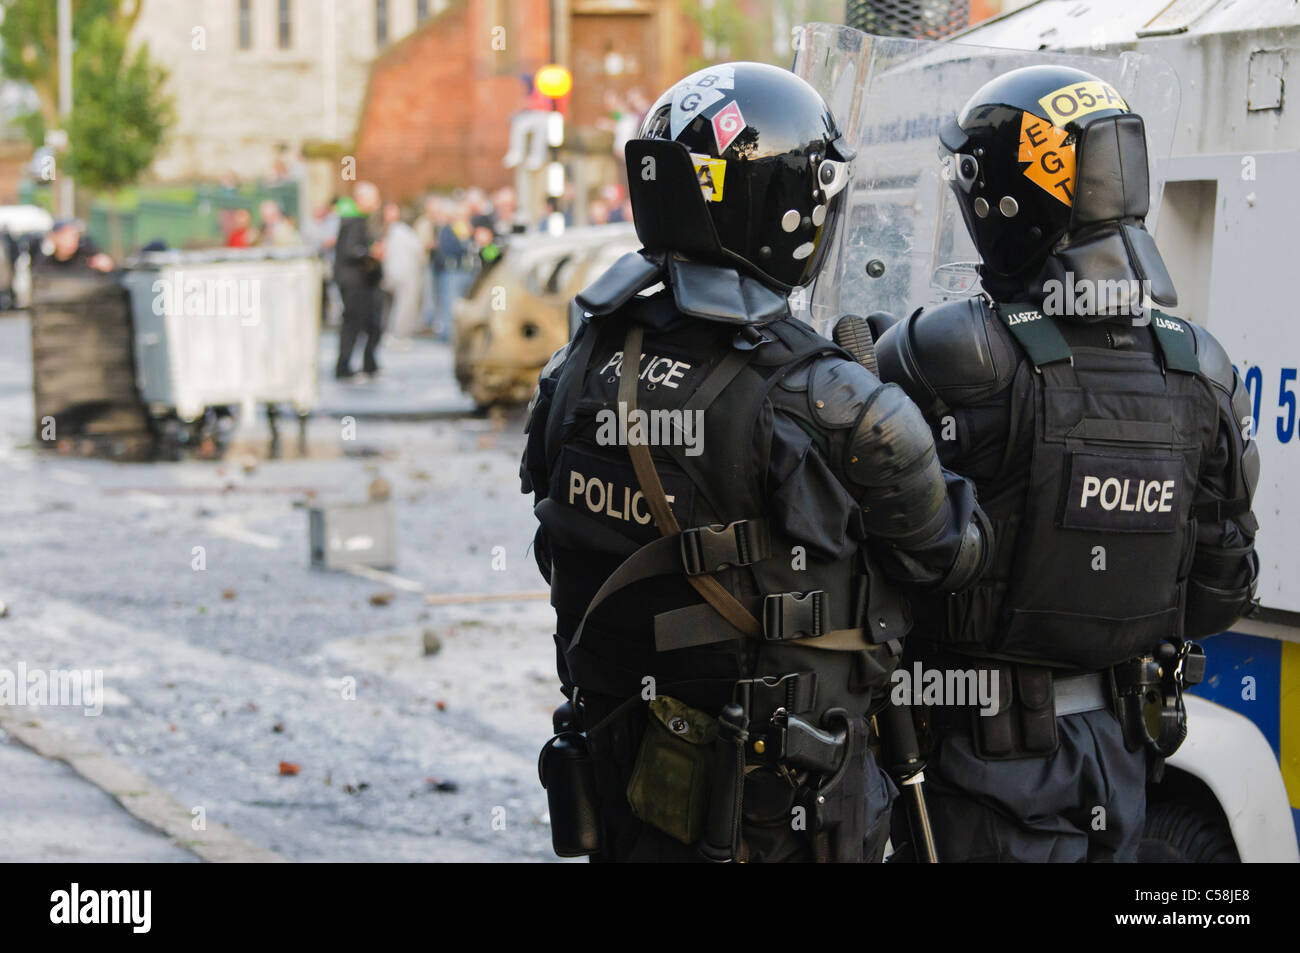 Police officers in riot gear at a riot gear watch group of rioters Stock Photo